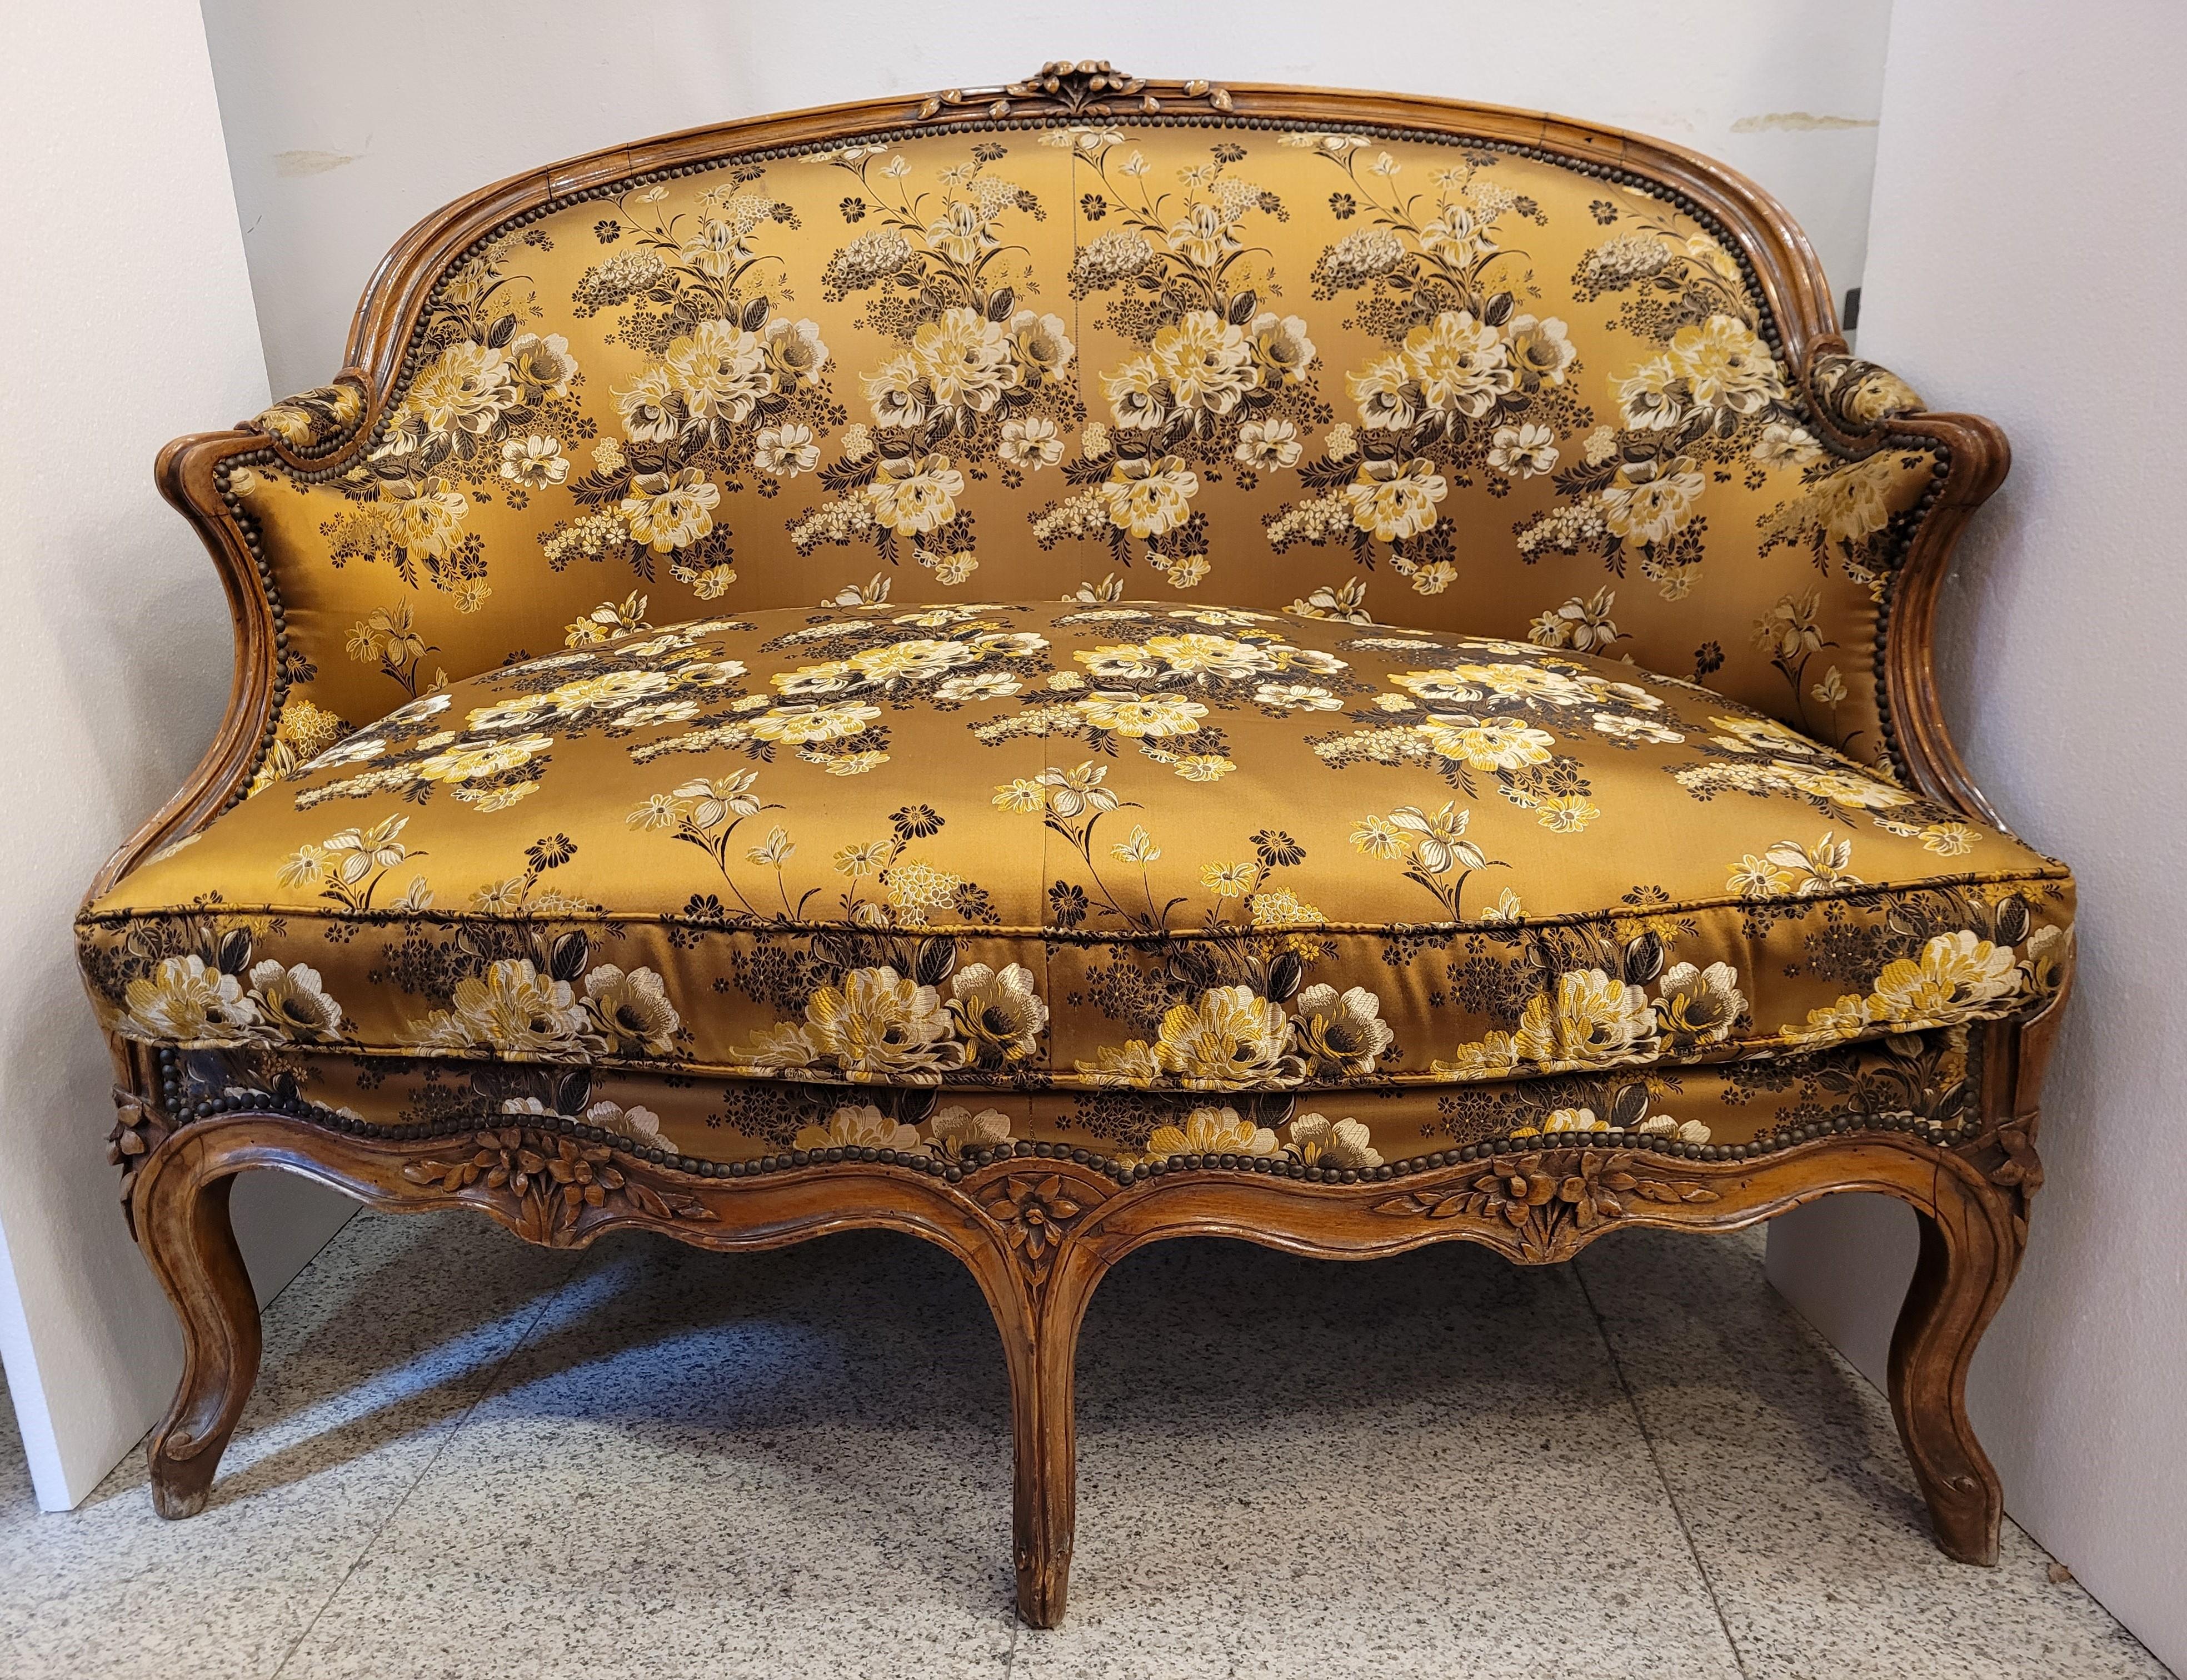 Gorgeous Canapé- sofá en Corbeille, in Louis XV style, made of carved walnut wood with plant decorations and 19th century upholstery in ocher silk with floral print. The Corbeille settee is a type of settee with an oval base, the backrest of which